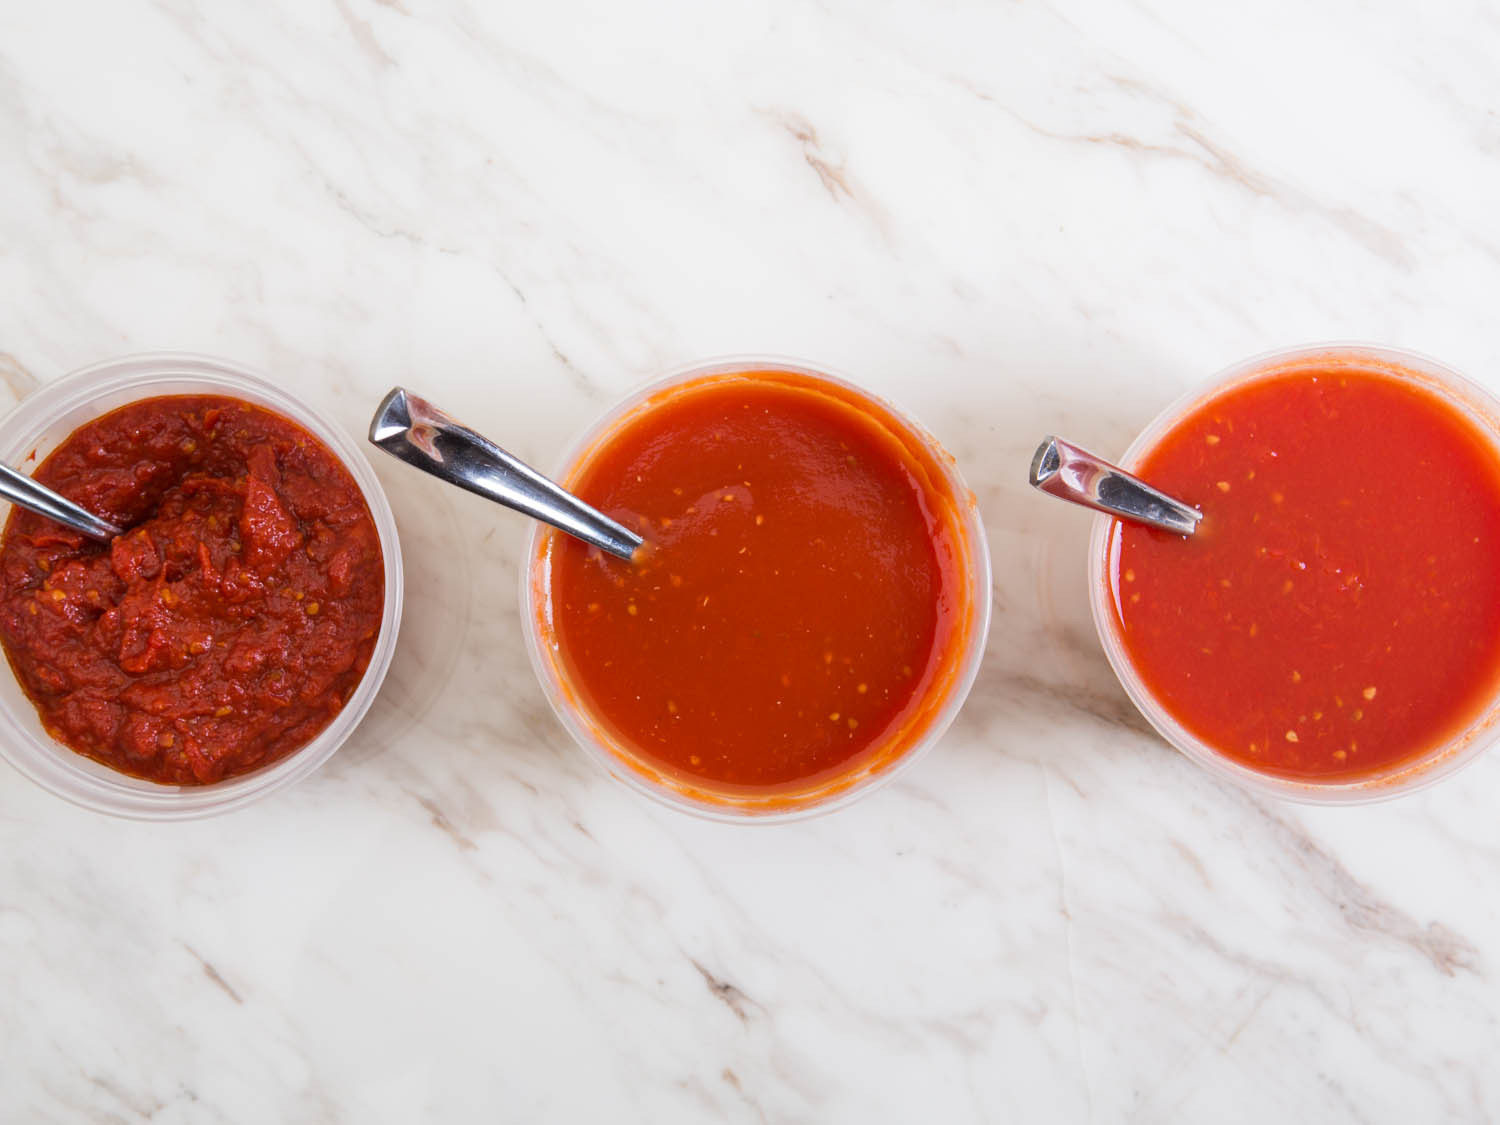 Best Tomato Sauce
 How to Make the Best Tomato Sauce From Fresh Tomatoes